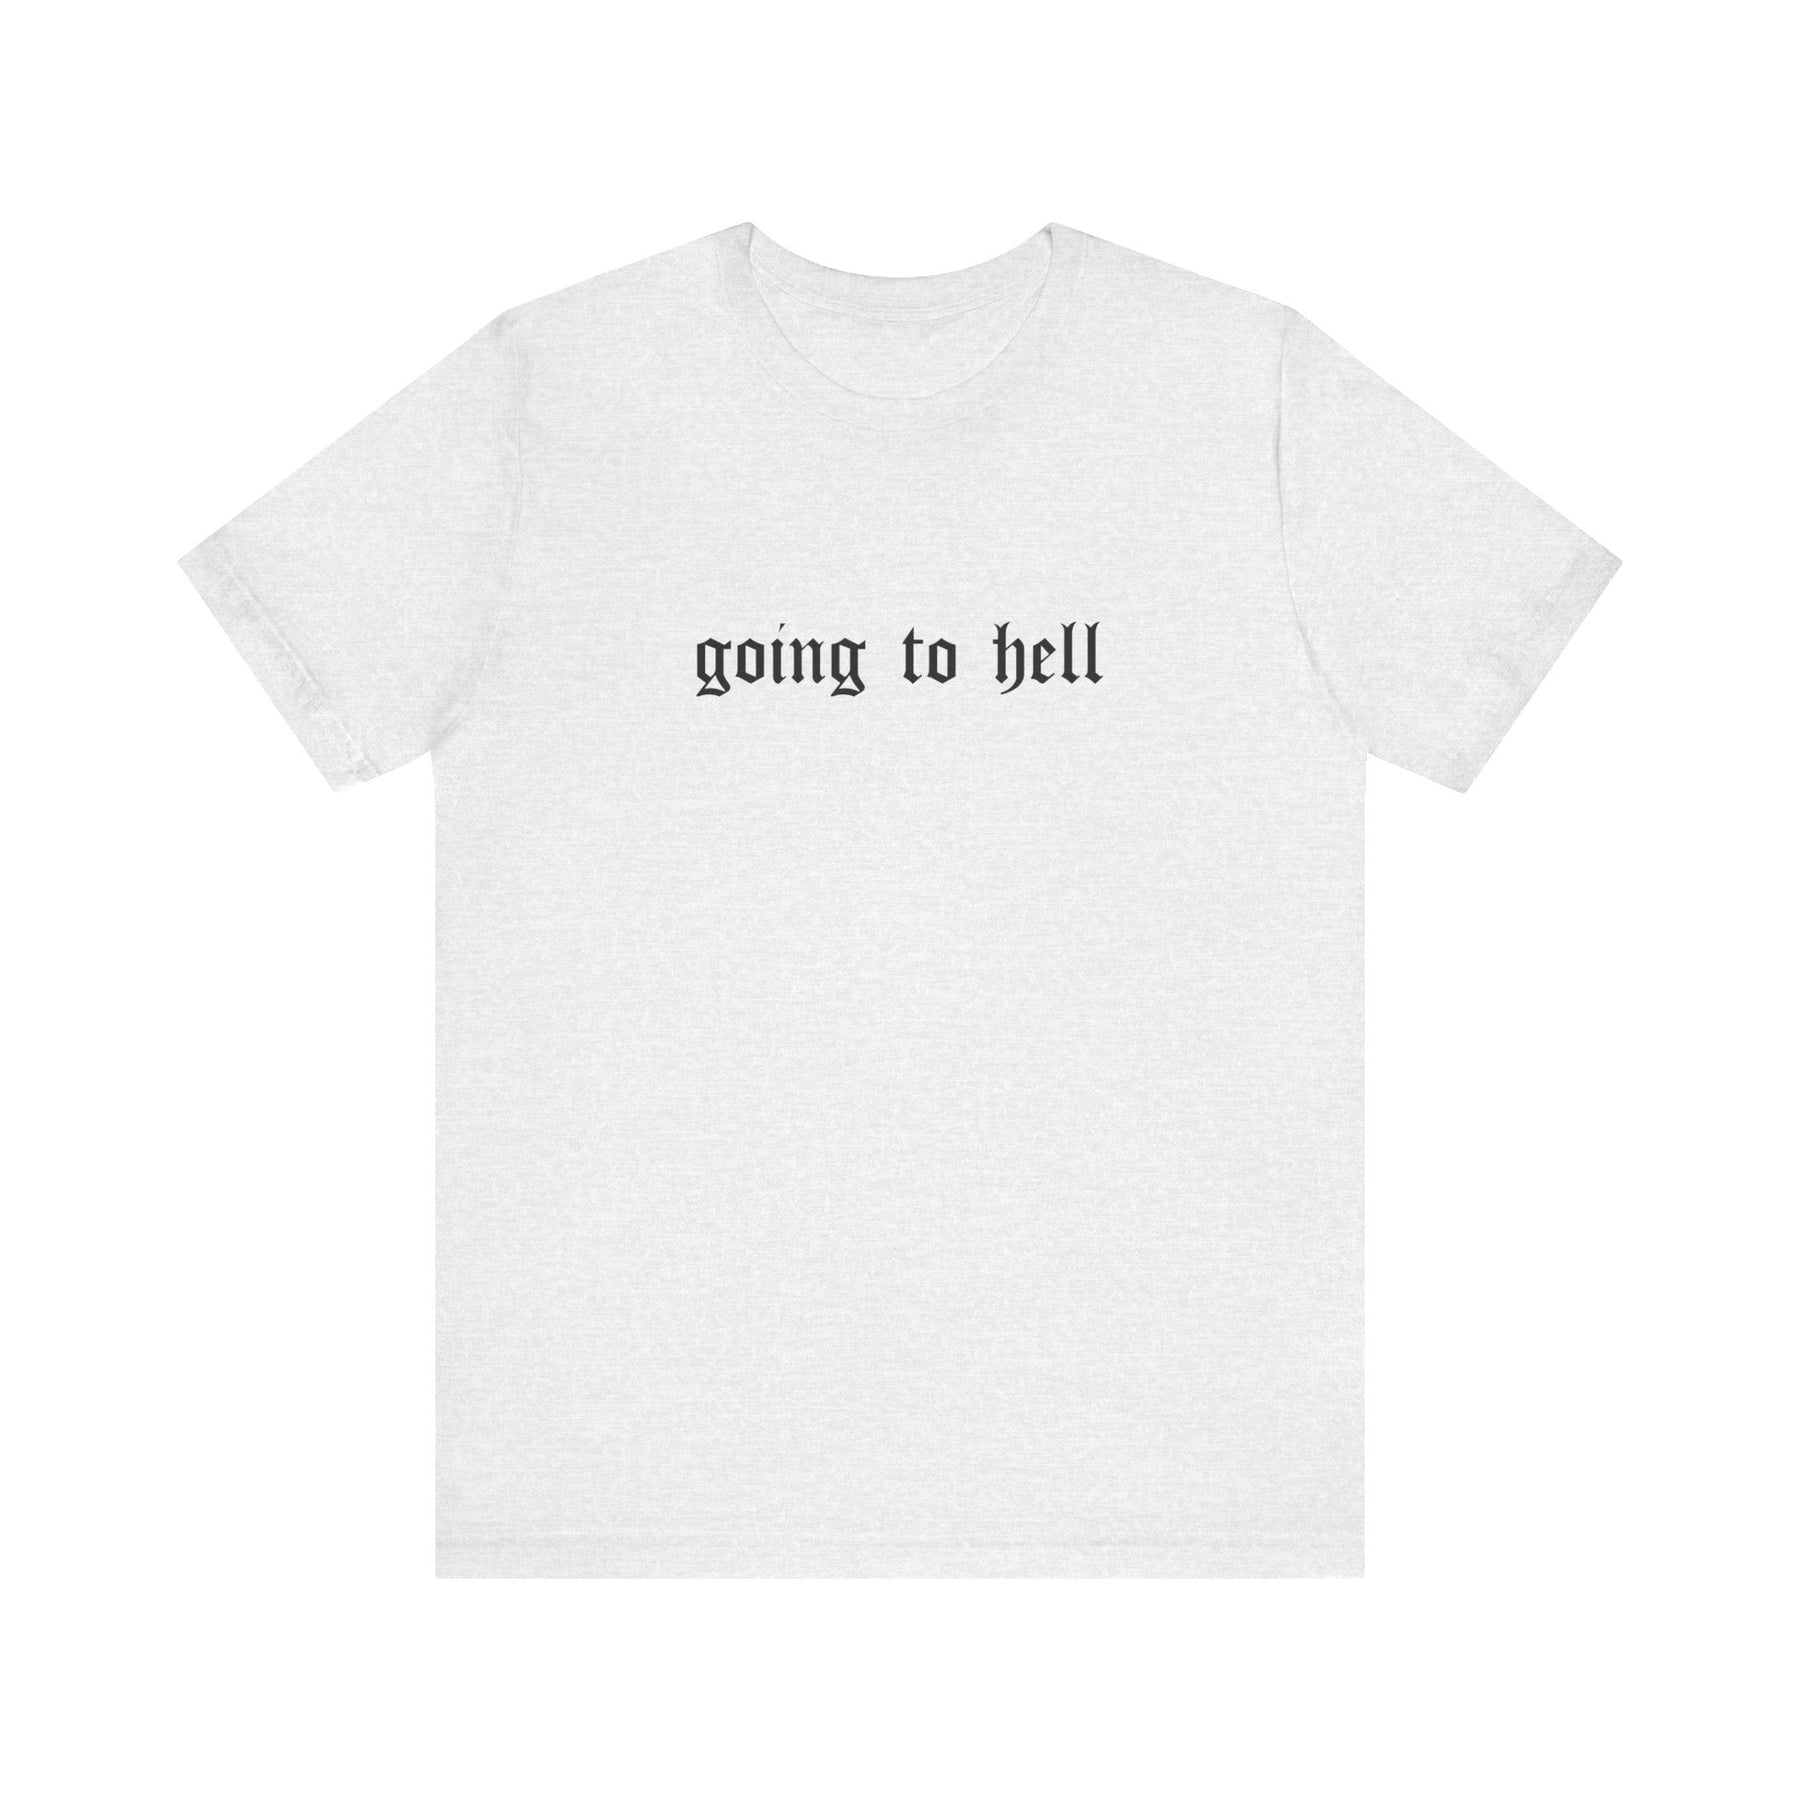 Going to Hell Gothic T - Shirt - Goth Cloth Co.T - Shirt23841703155476771786